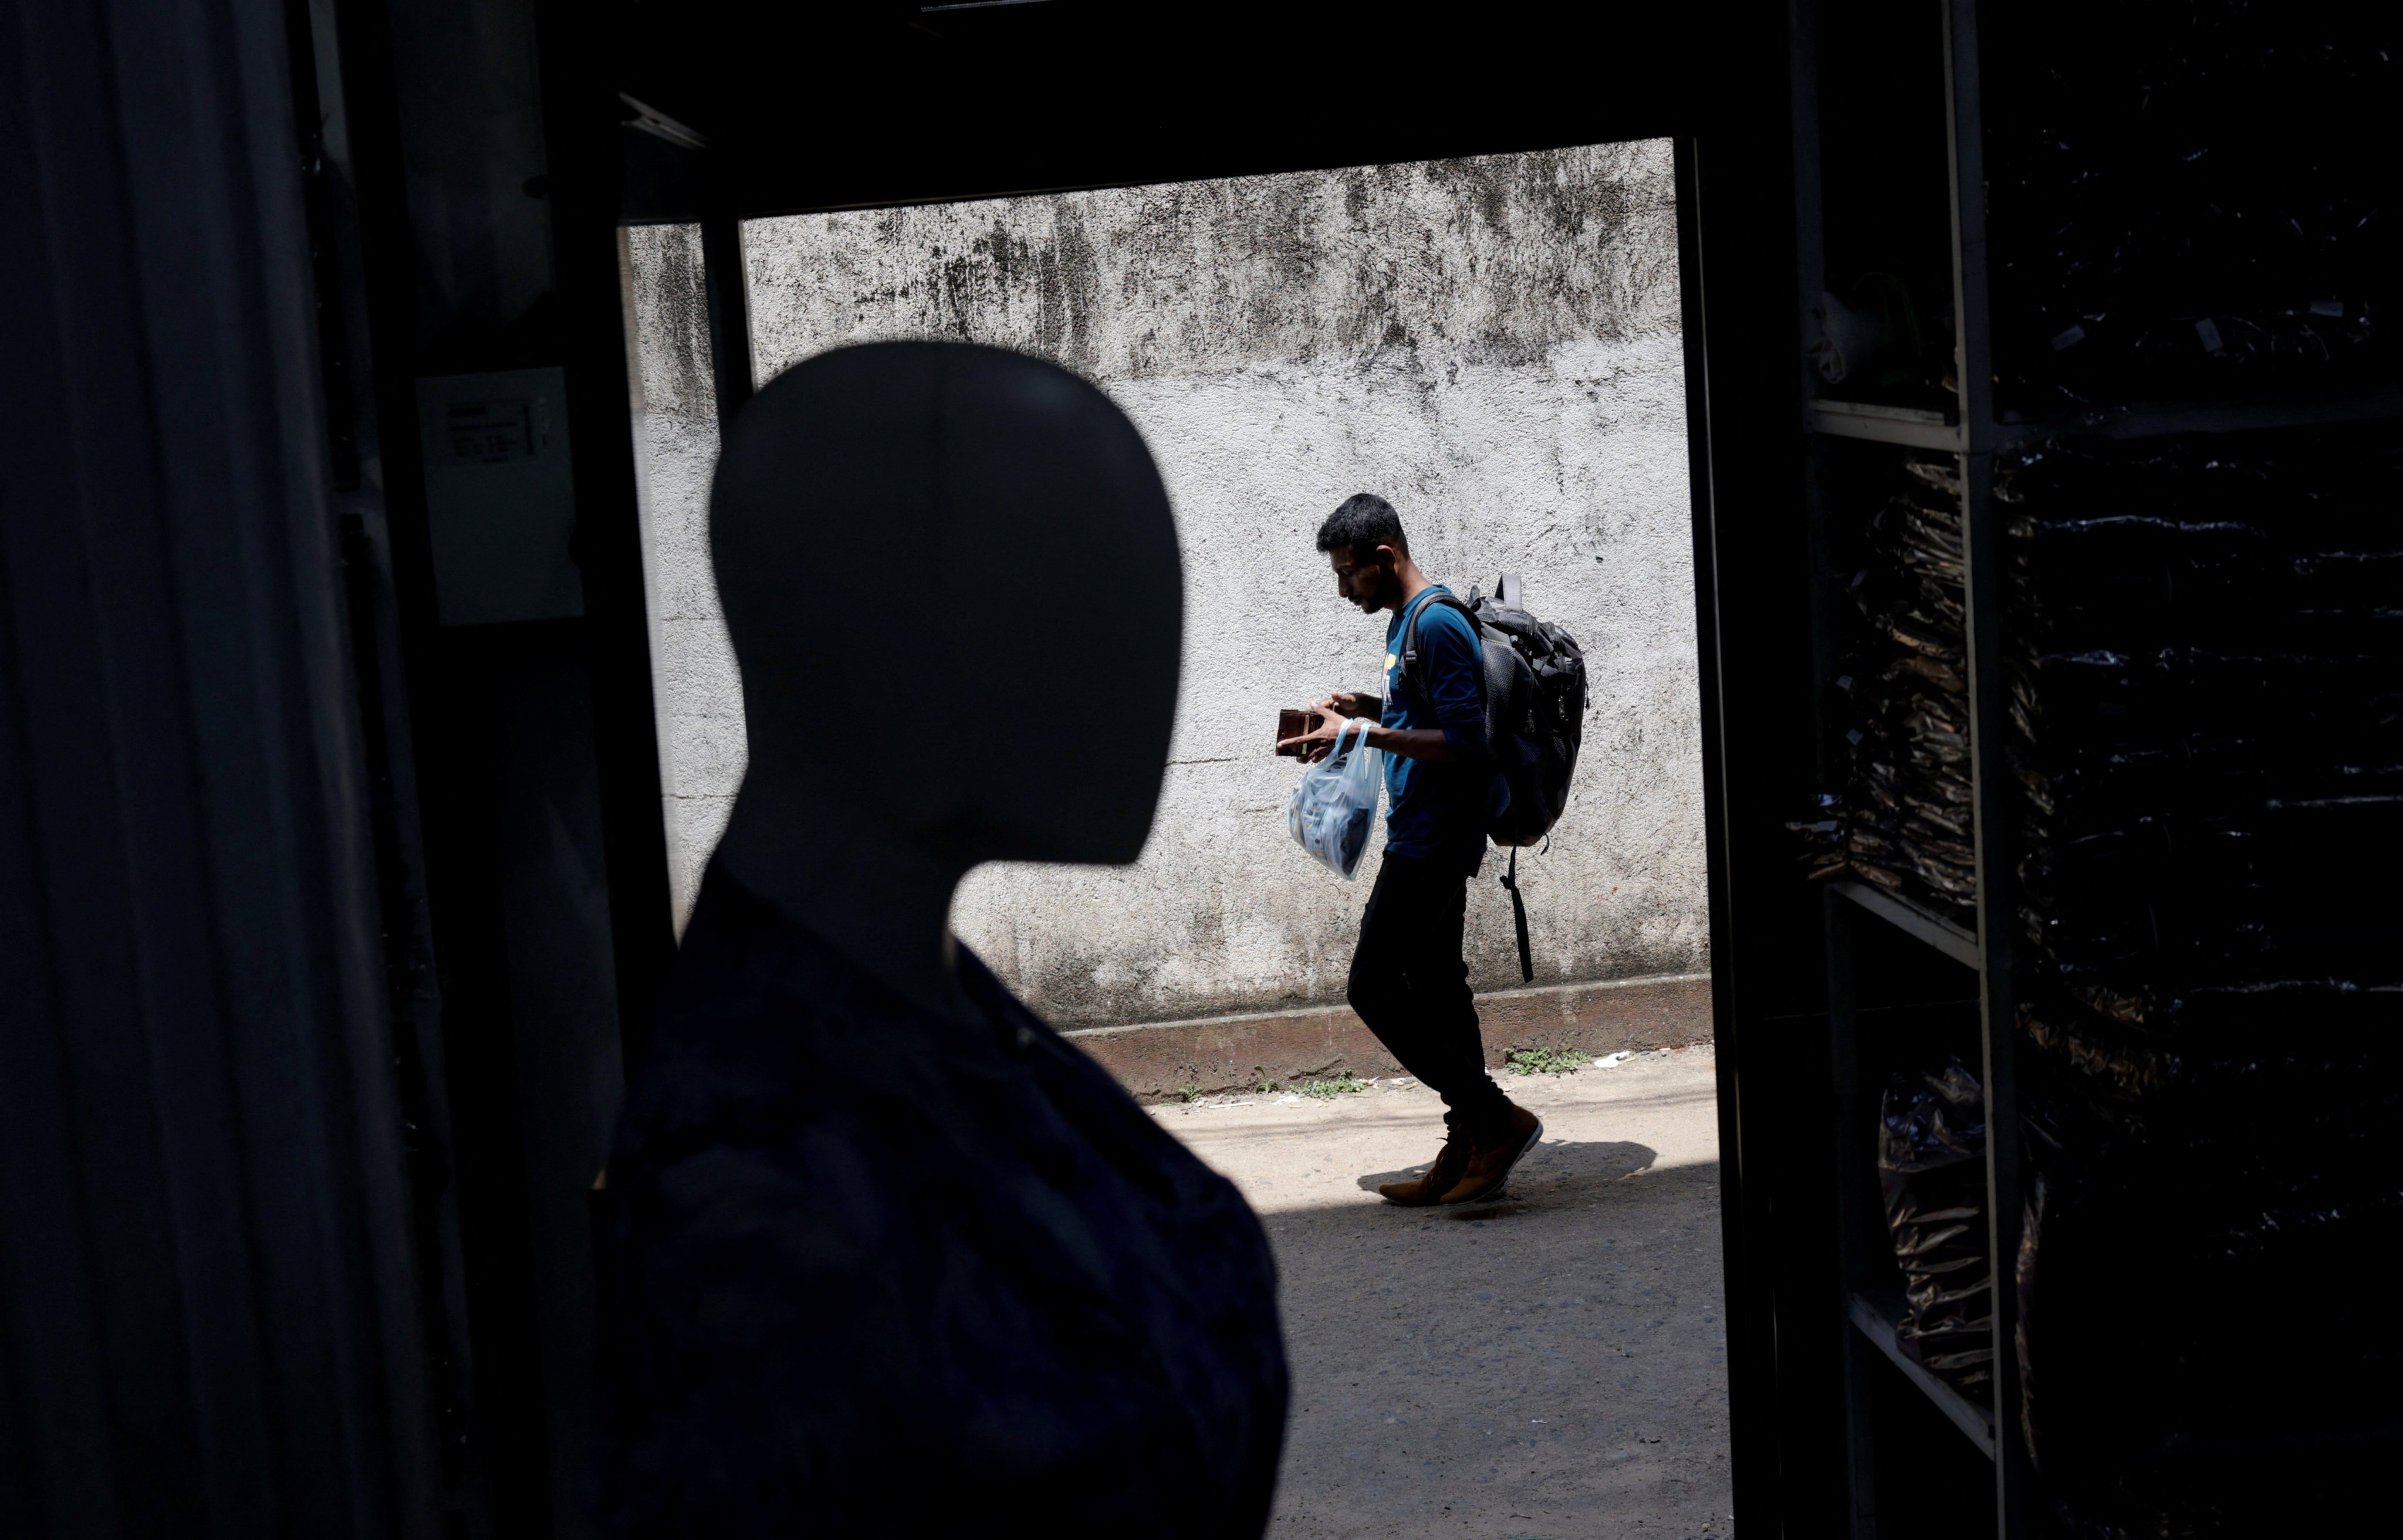 A man walks past a wholesale clothes shop while checking his wallet in Colombo, Sri Lanka, on April 11. Sri Lanka is geopolitically more relevant to China than many other debt-ridden countries. Photo: Reuters